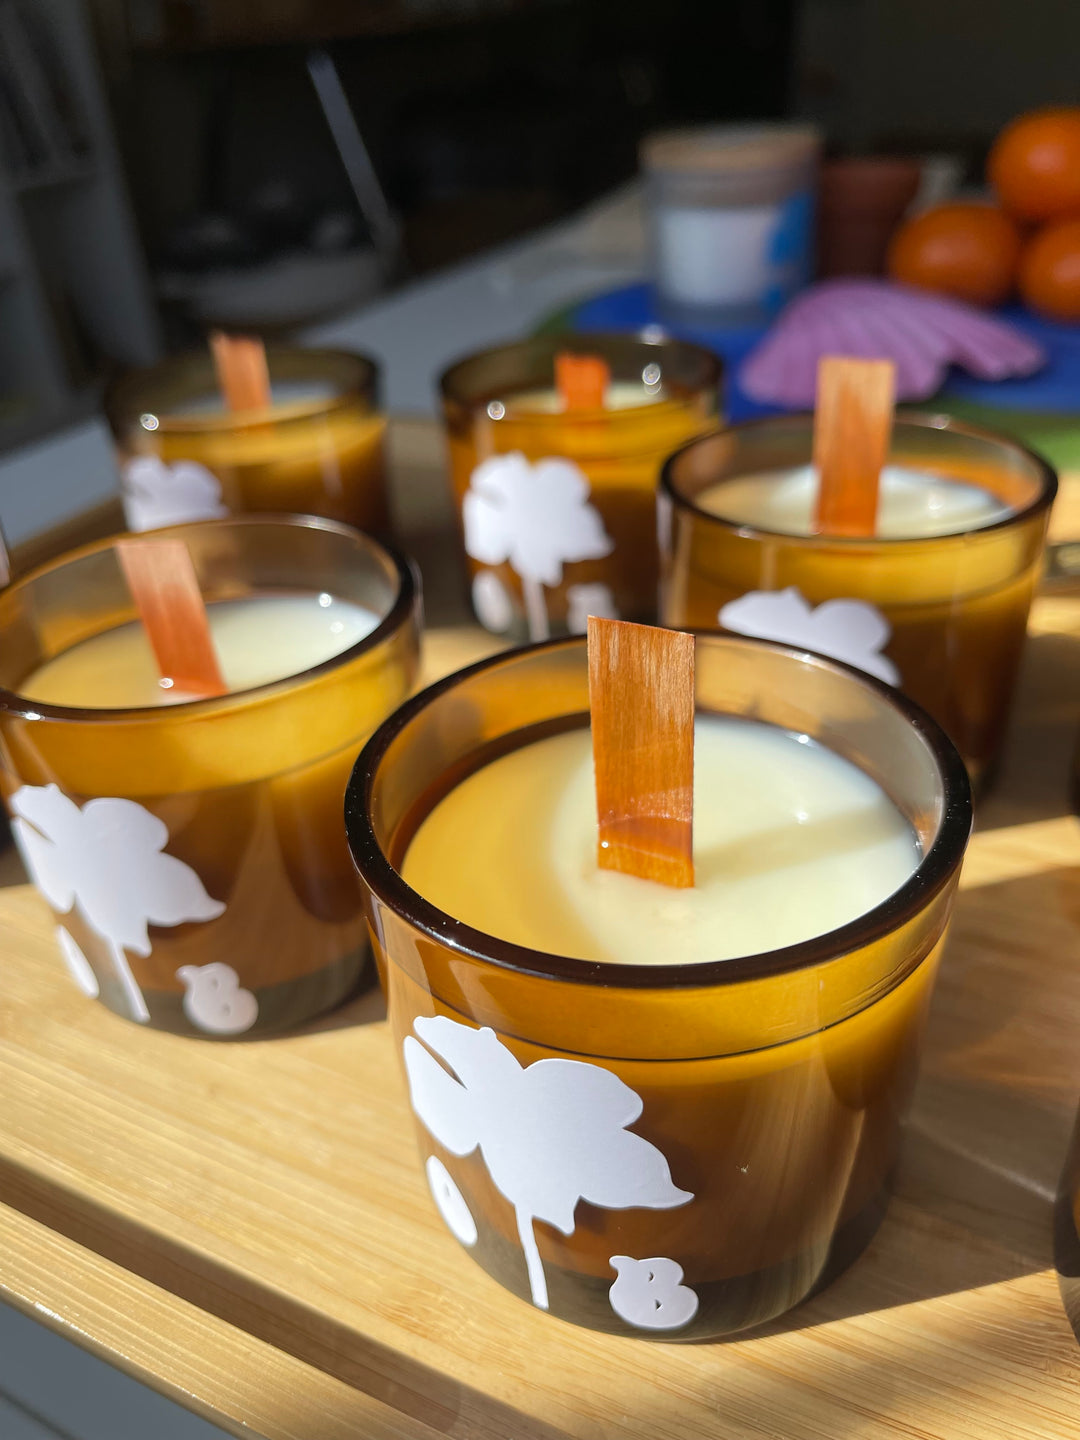 The Coconut Cream Soy Candle